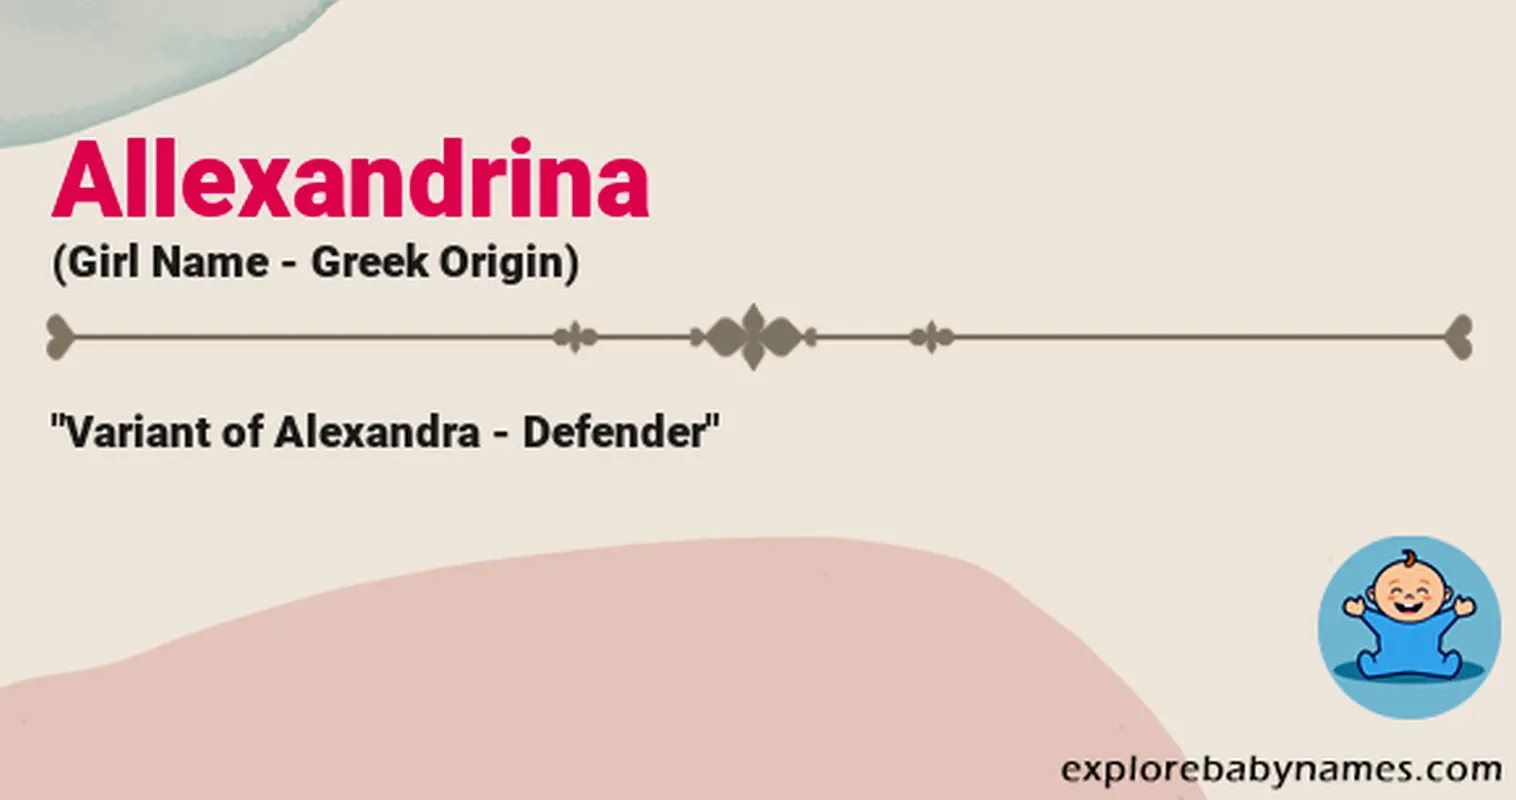 Meaning of Allexandrina